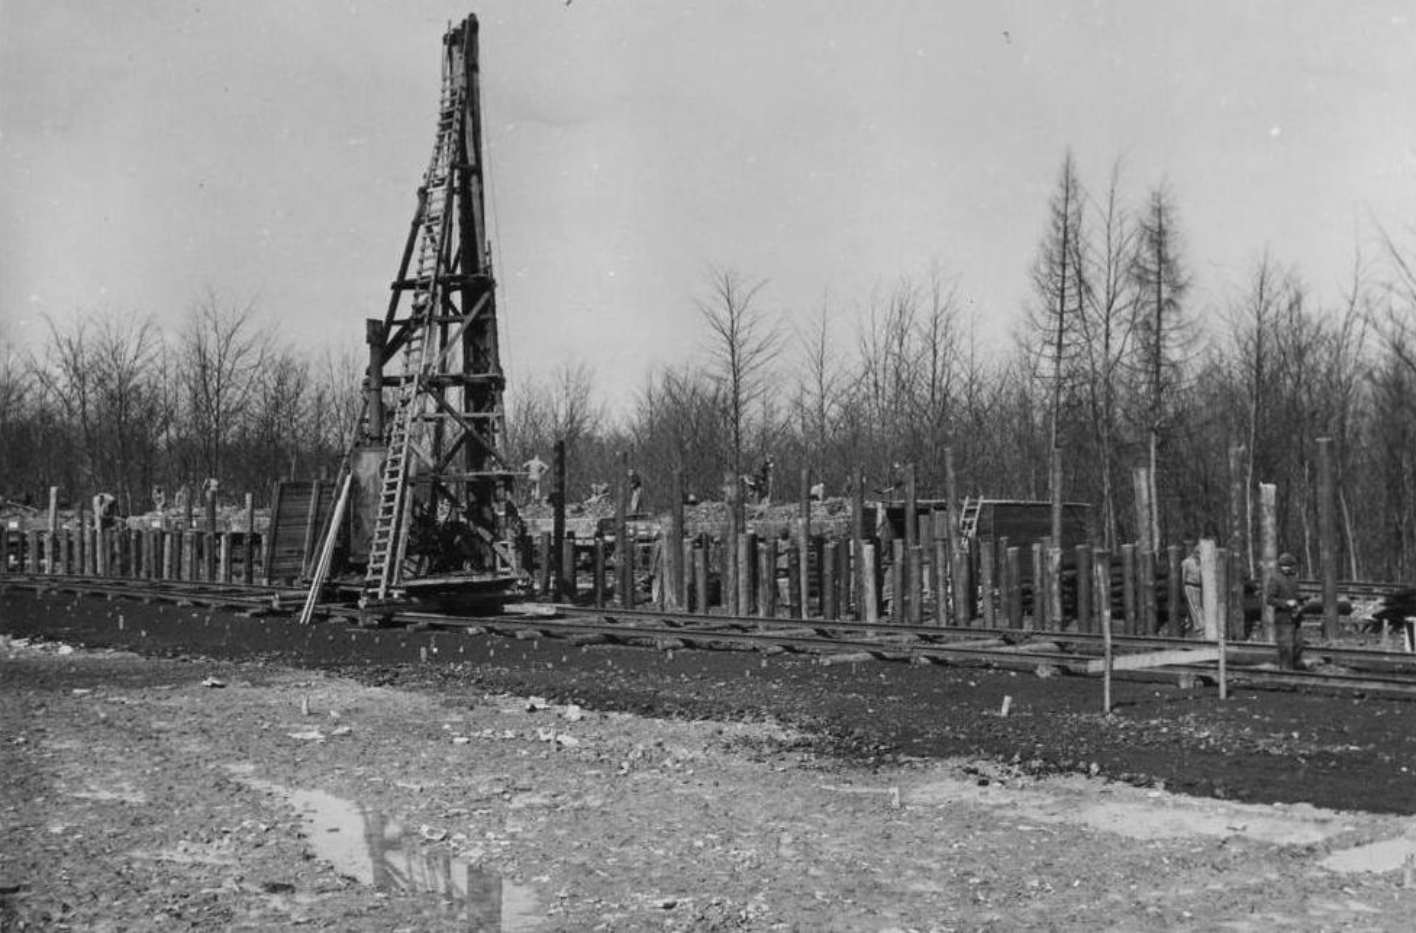 Prisoners during the construction of the Buchenwald railroad station. In the middle left, a high wooden scaffolding tower can be seen on the track.